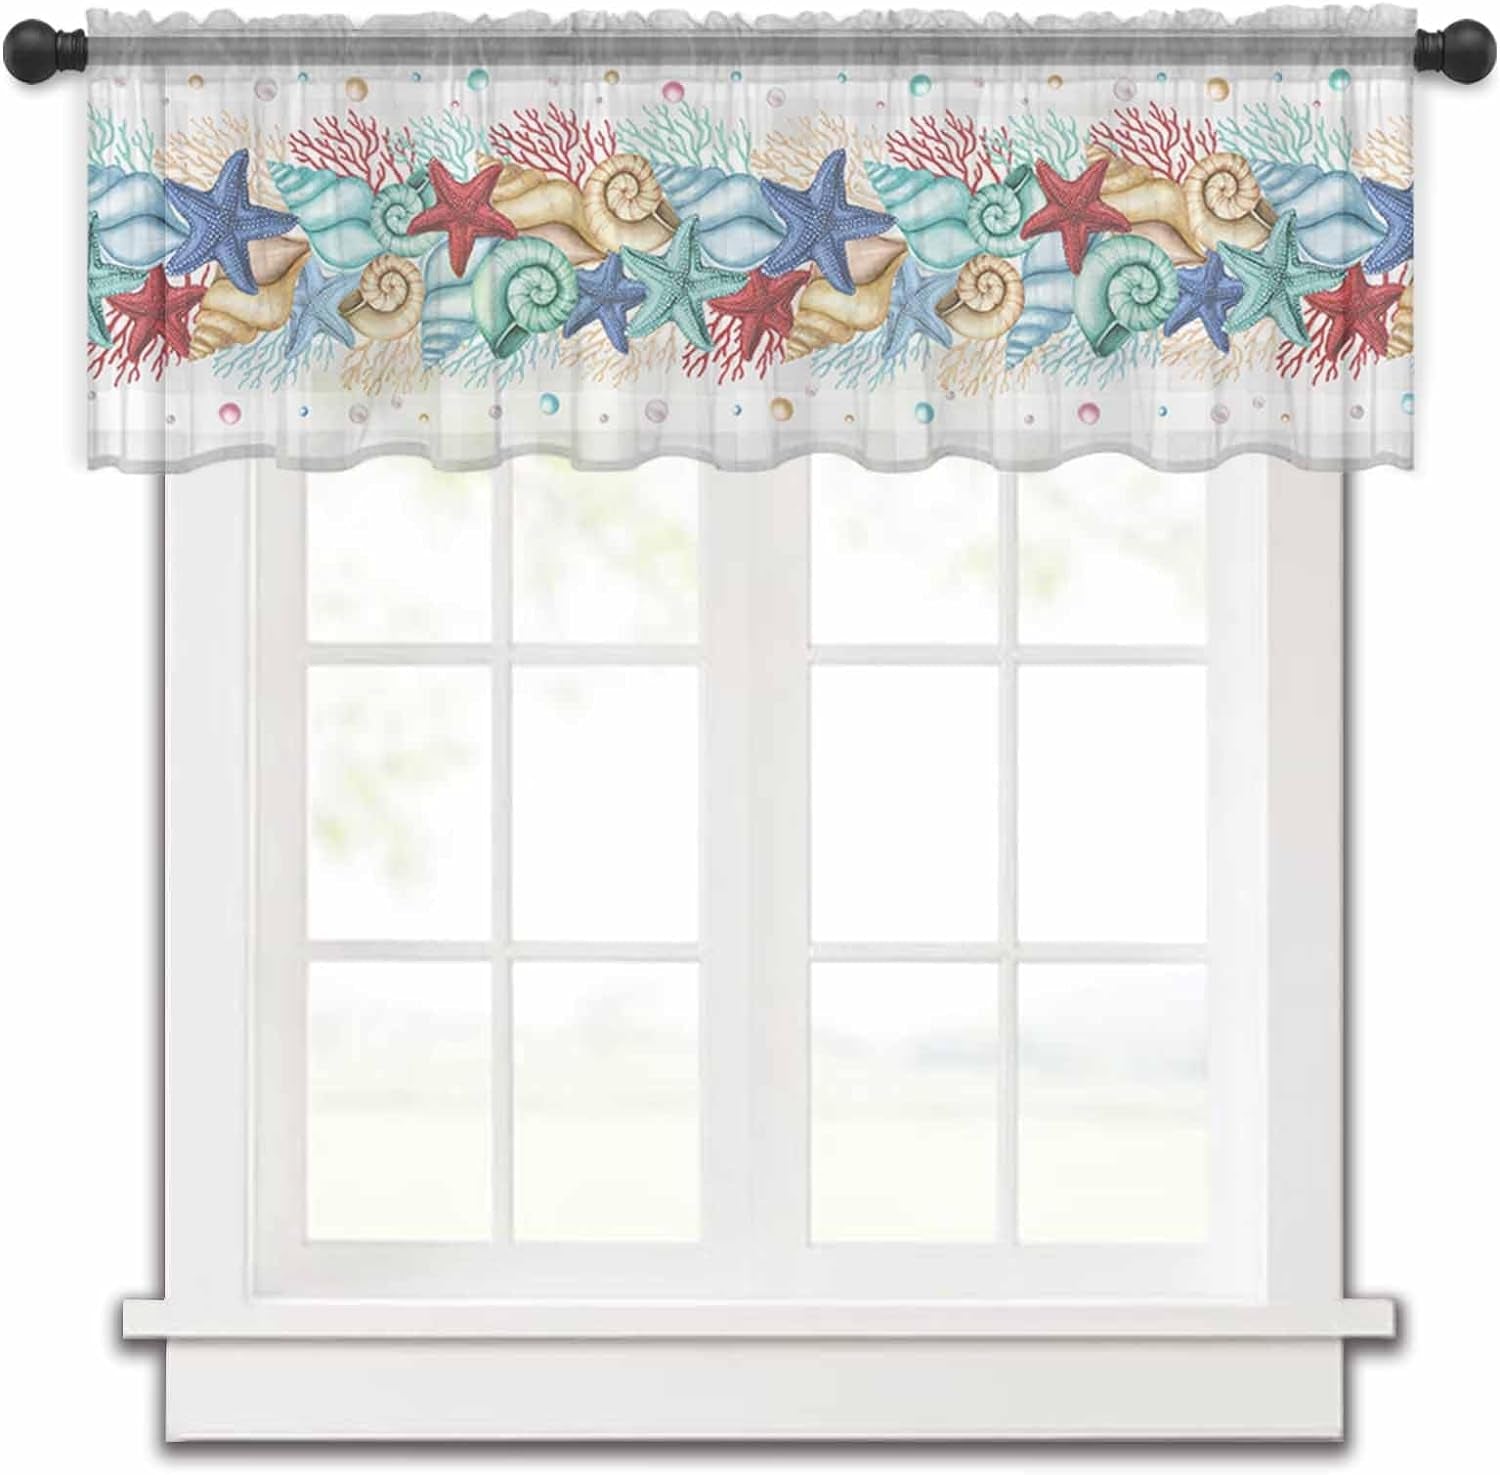 Starfish Plaid Valance Curtains for Kitchen/Living Room/Bathroom/Bedroom Window,Rod Pocket Small Topper Half Short Window Curtains Voile Sheer Scarf, Buffalo Gray Sea Colored Coral Conch Pearl 42"X18"